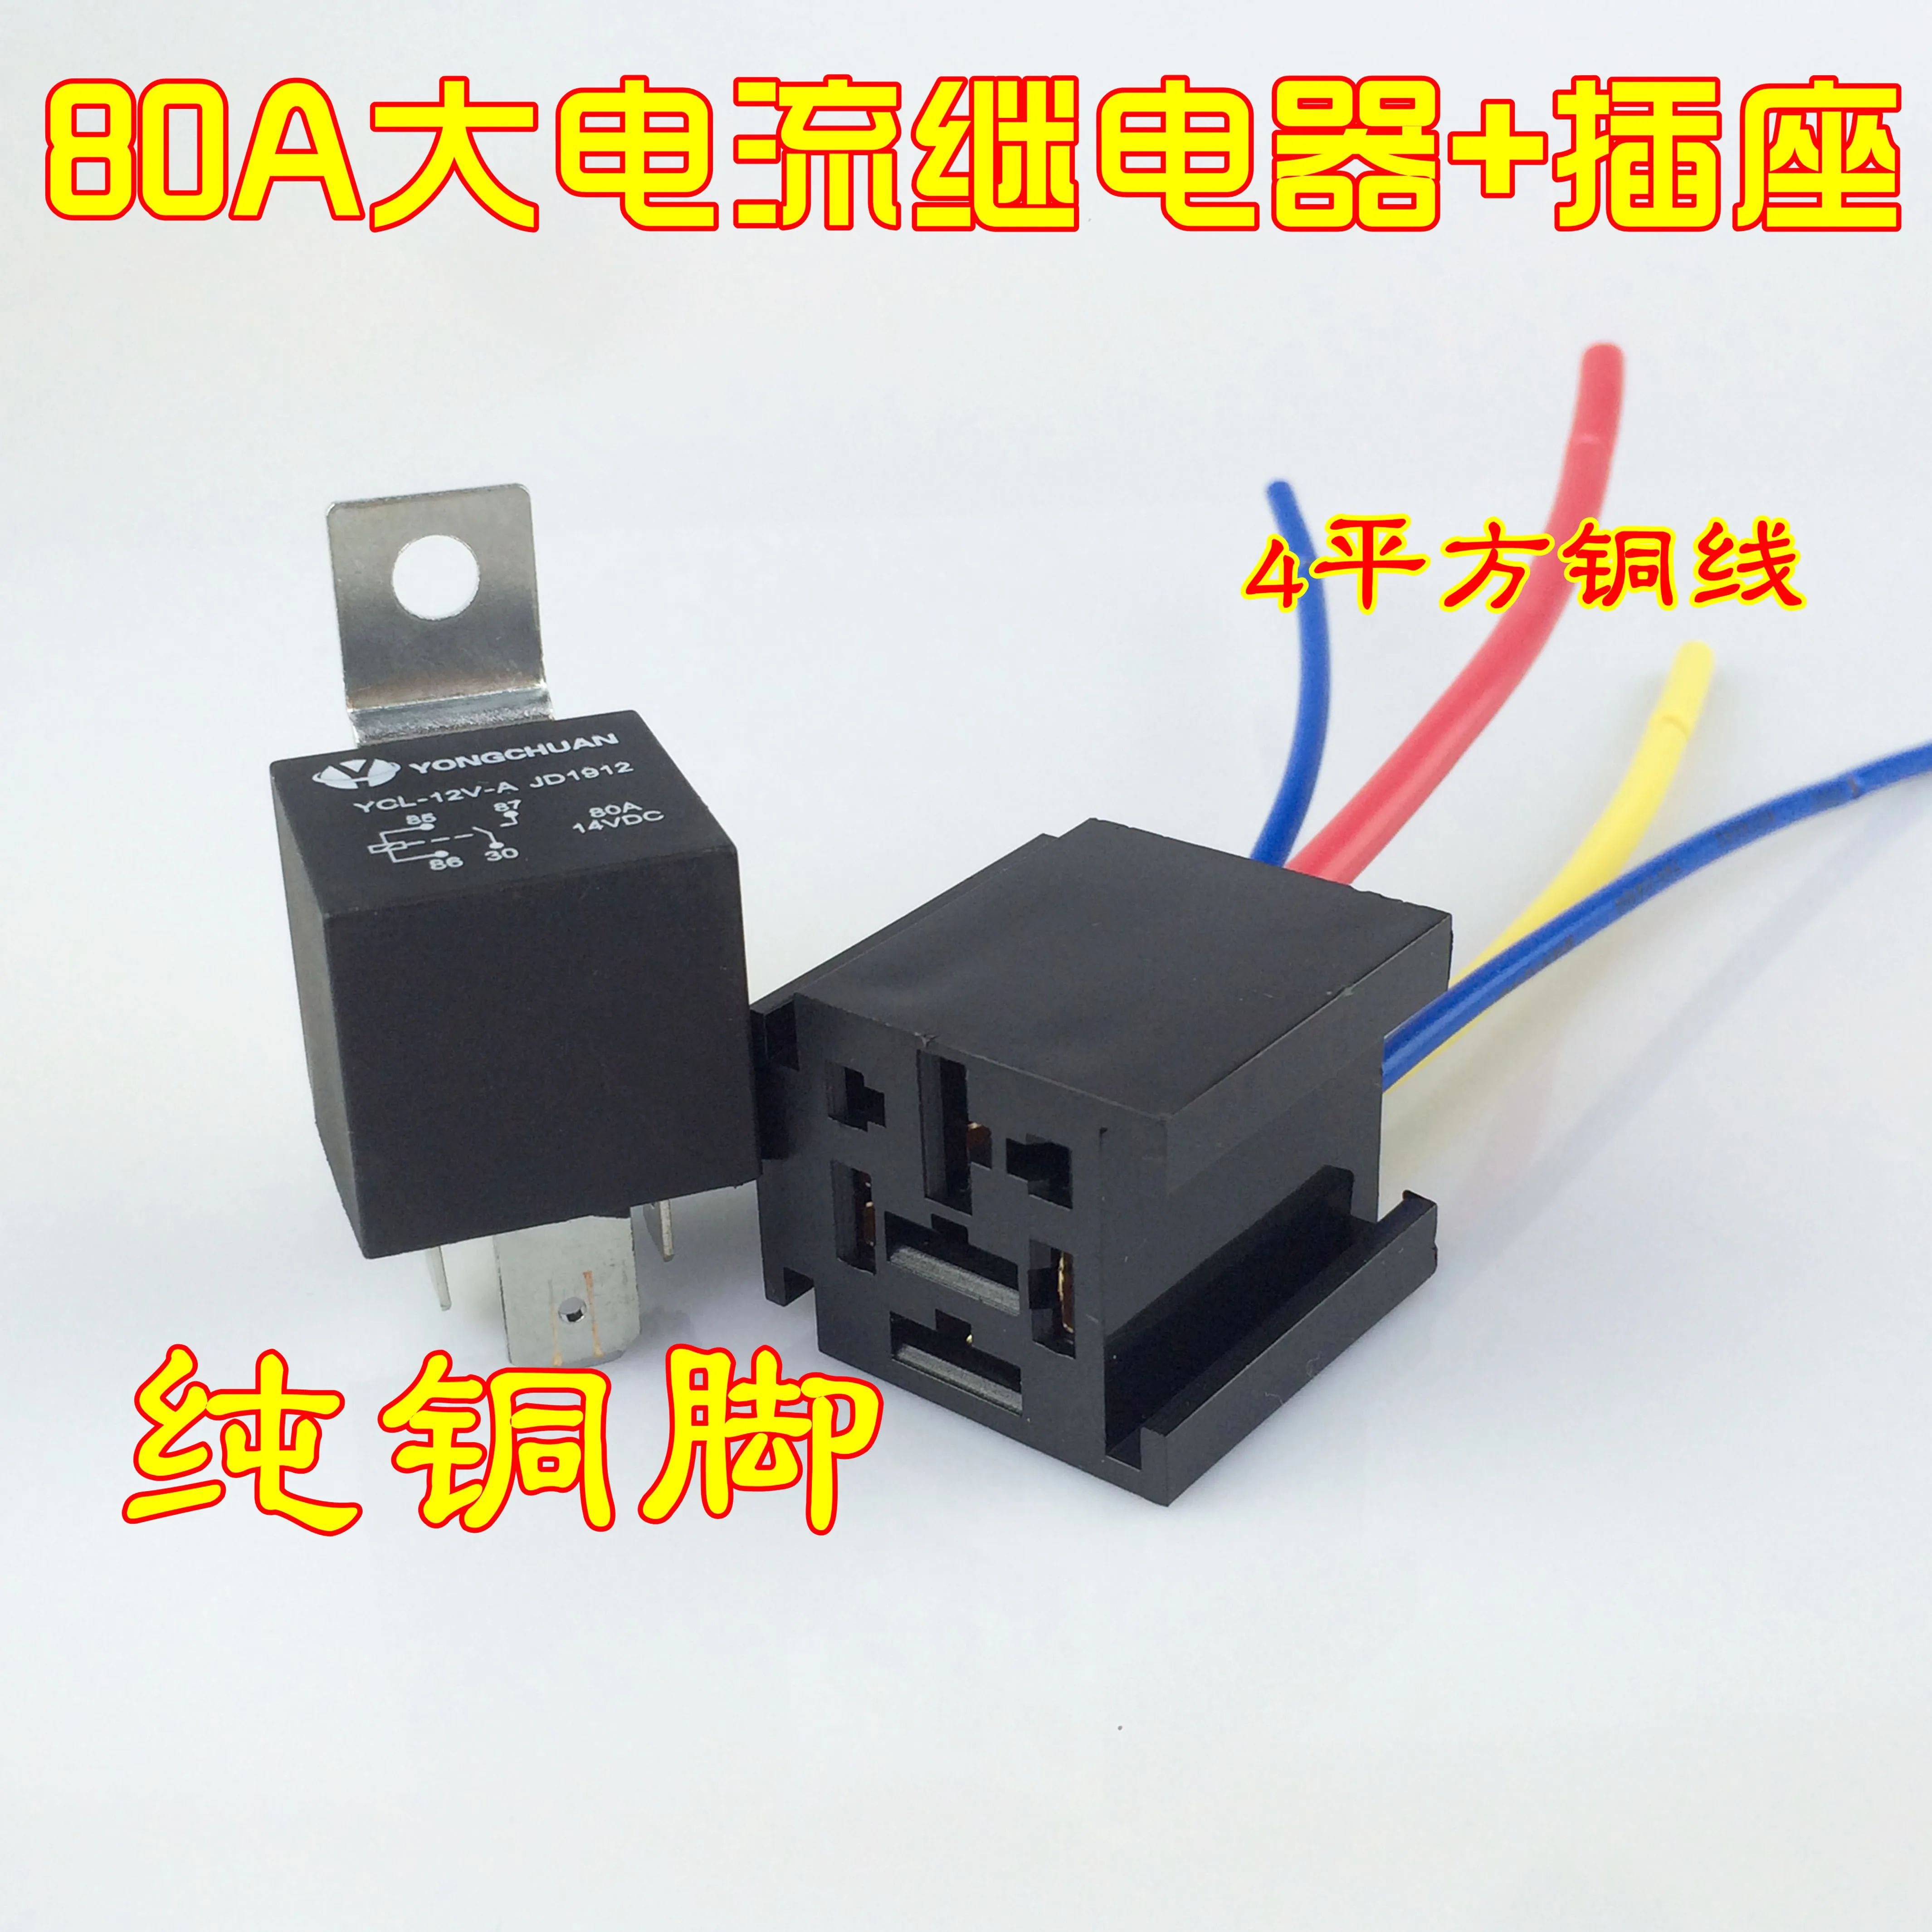 Automotive Relay 80A 4-pin 4-wire JD1912 12V Cut Foot Long Wide Foot with Socket